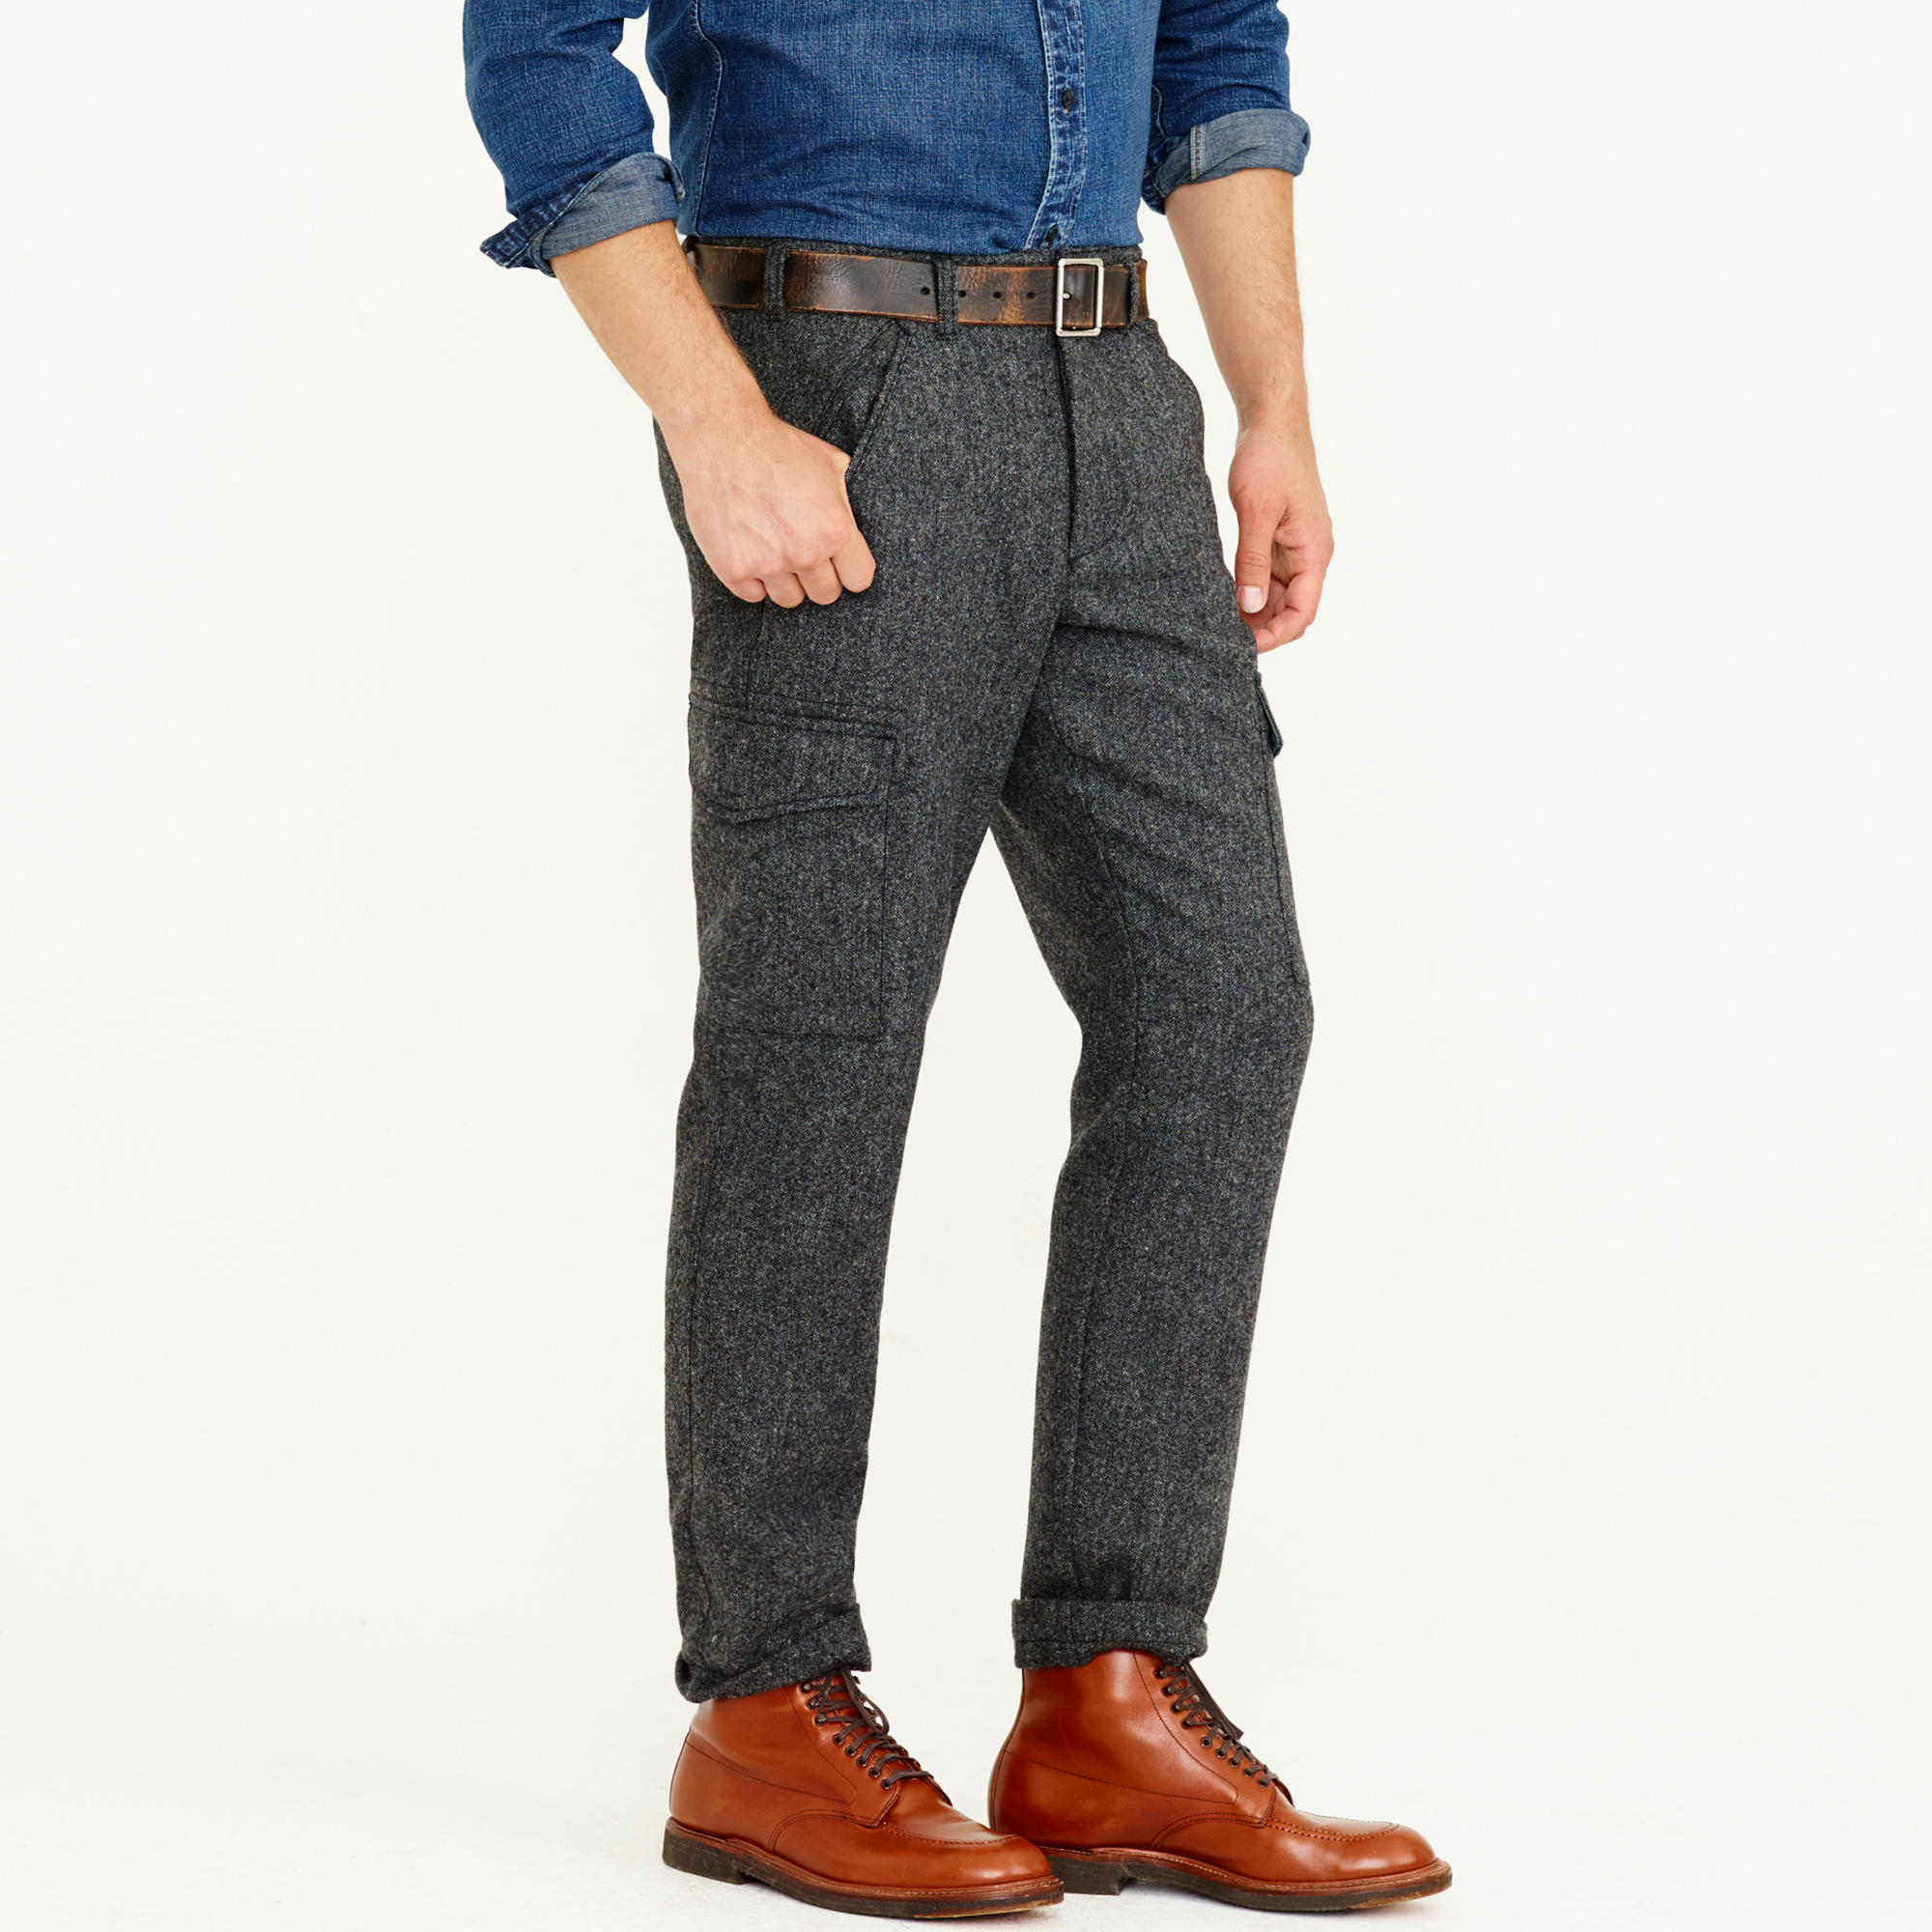 Lyst - J.Crew Wallace & Barnes Donegal Wool Cargo Pant in Gray for Men